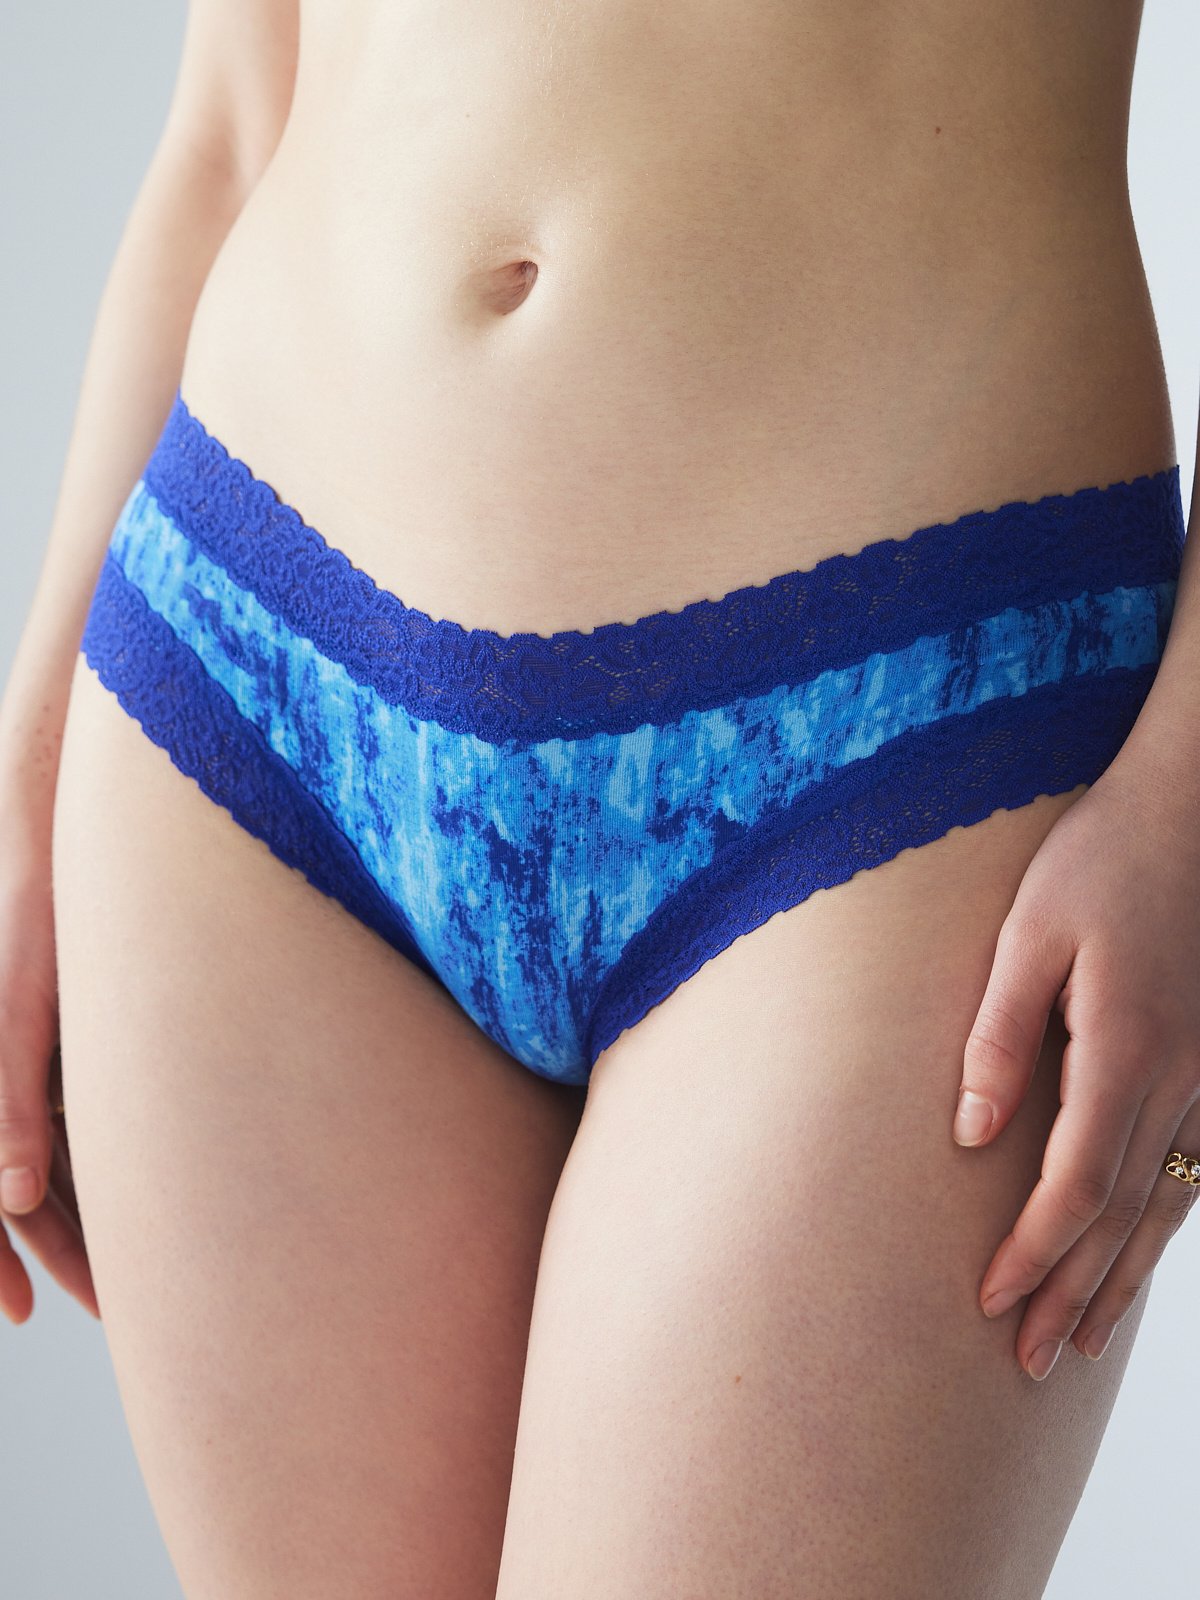 Cotton and Lace Trim Cheeky Panty - Icy blue